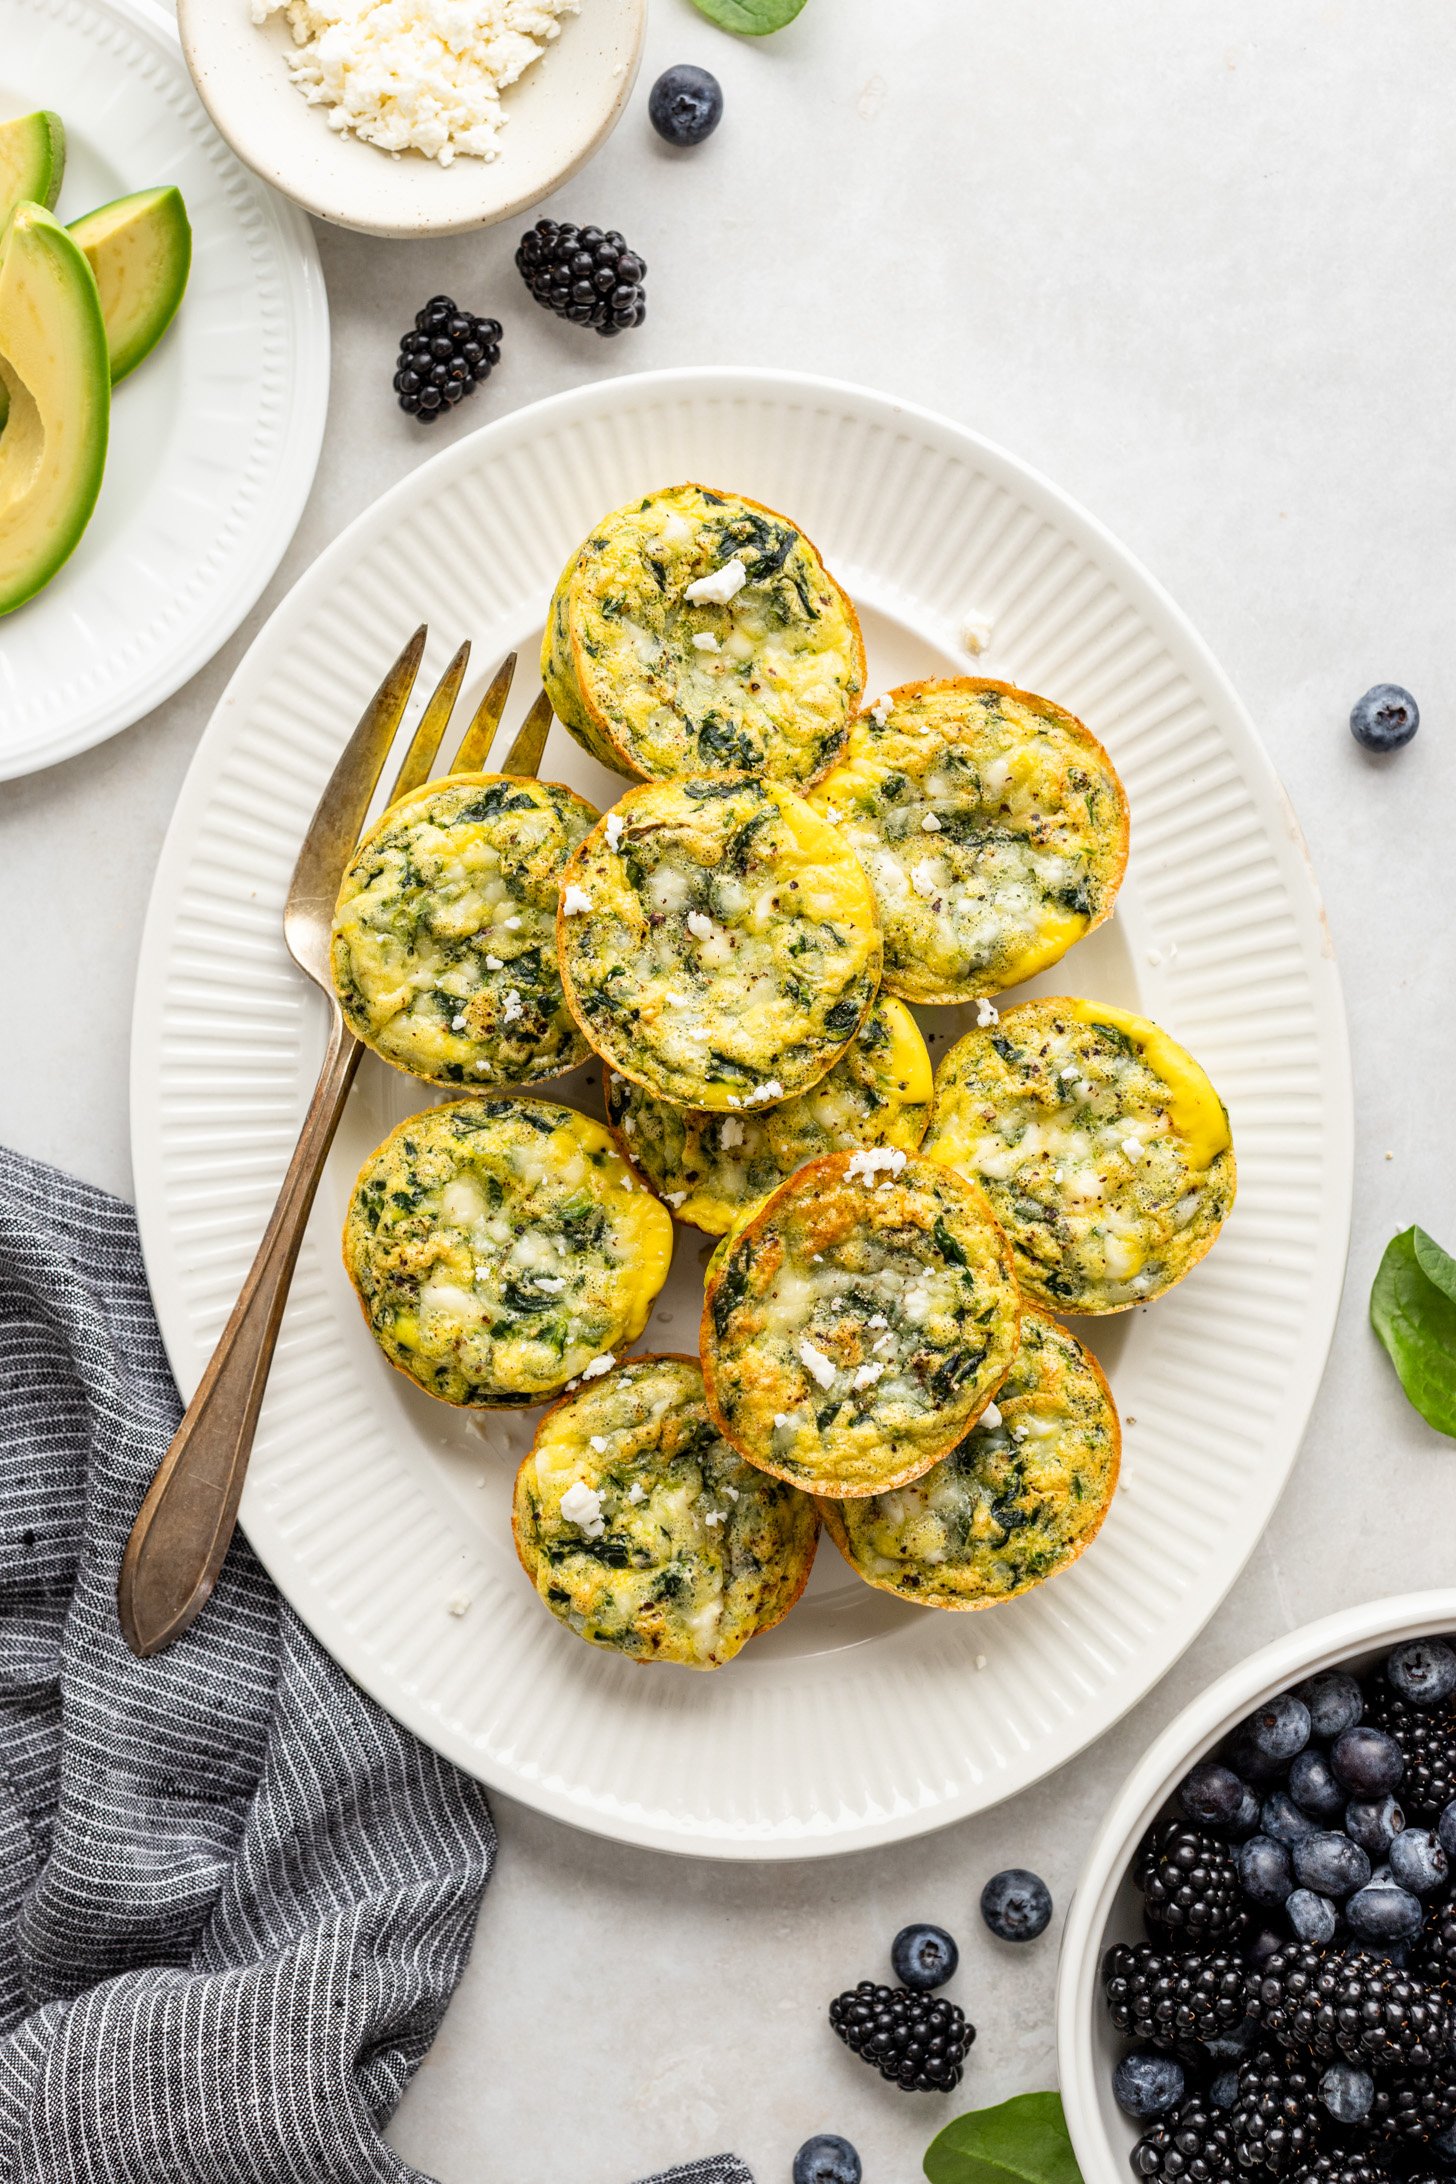 spinach & feta eggs cups on a white platter with a serving fork. There are berries in a bowl and a plate of sliced avocado next to the platter and a gray striped napkin.